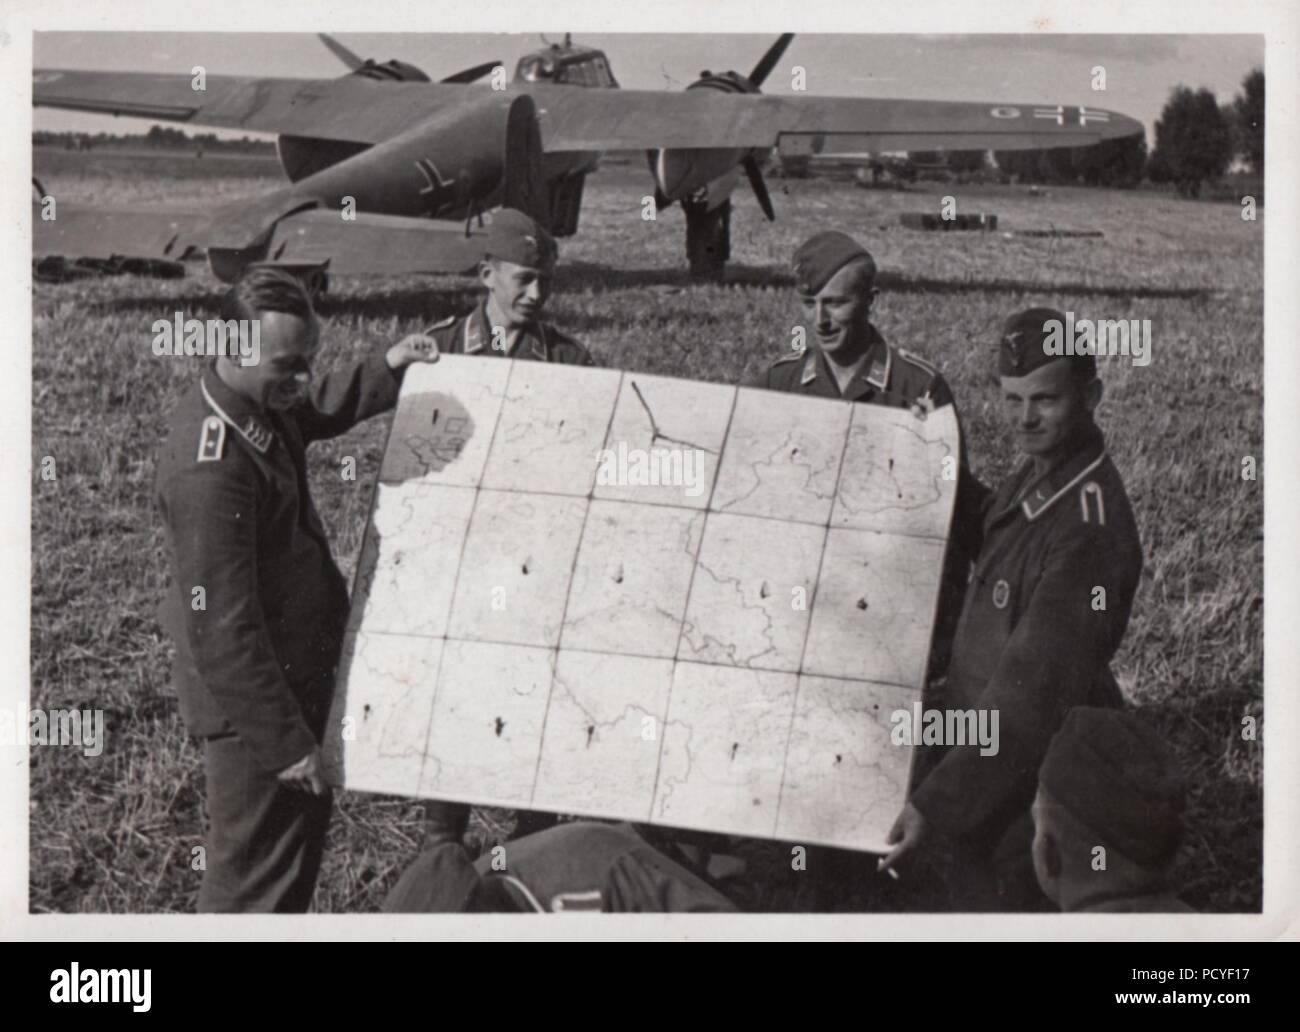 Image from the photo album of Oberfeldwebel Gotthilf Benseler of 9. Staffel, Kampfgeschwader 3: Aircrew of 9. Staffel, Kampfgeschwader 3 hold up a map of western Poland, during the campaign against Poland in September 1939. In the background is one of the Dornier Do 17Z-2s of 9./KG 3. Stock Photo